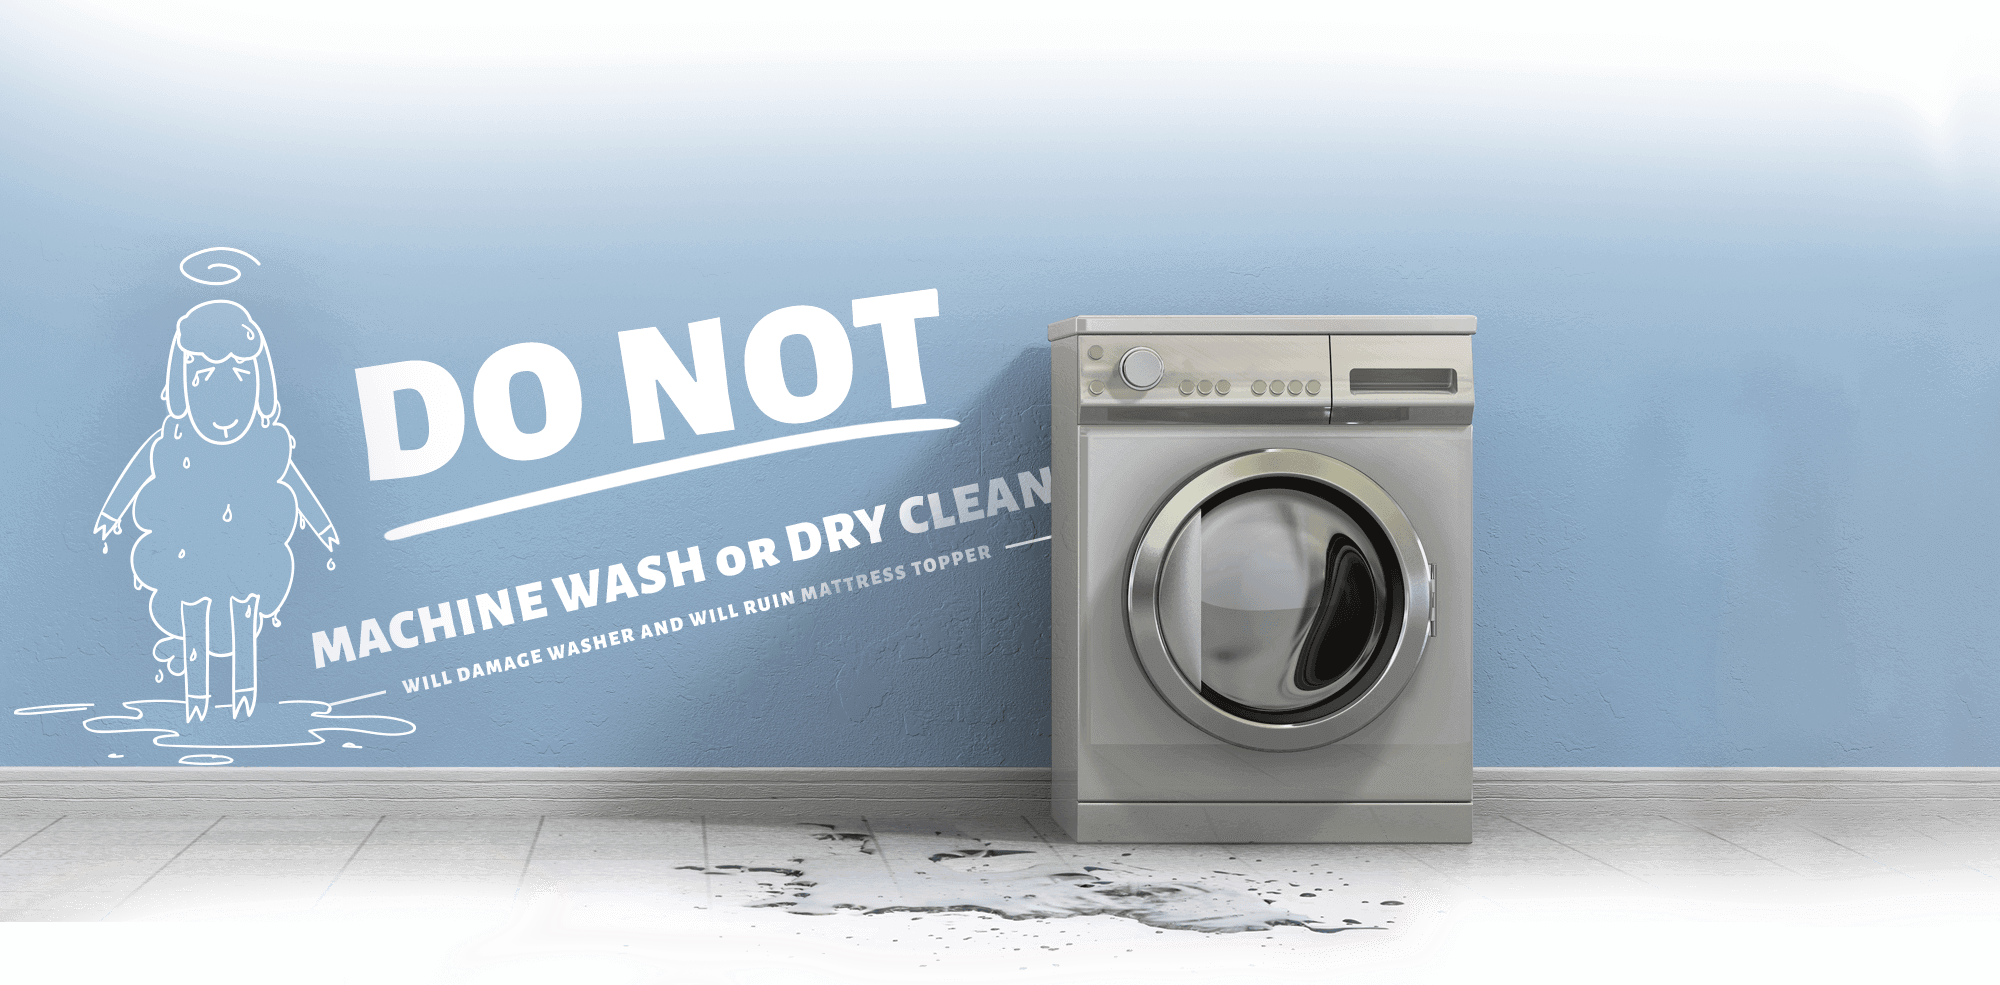 Do Not Machine Wash or Dry Clean - Will damage washer and will ruin mattress topper